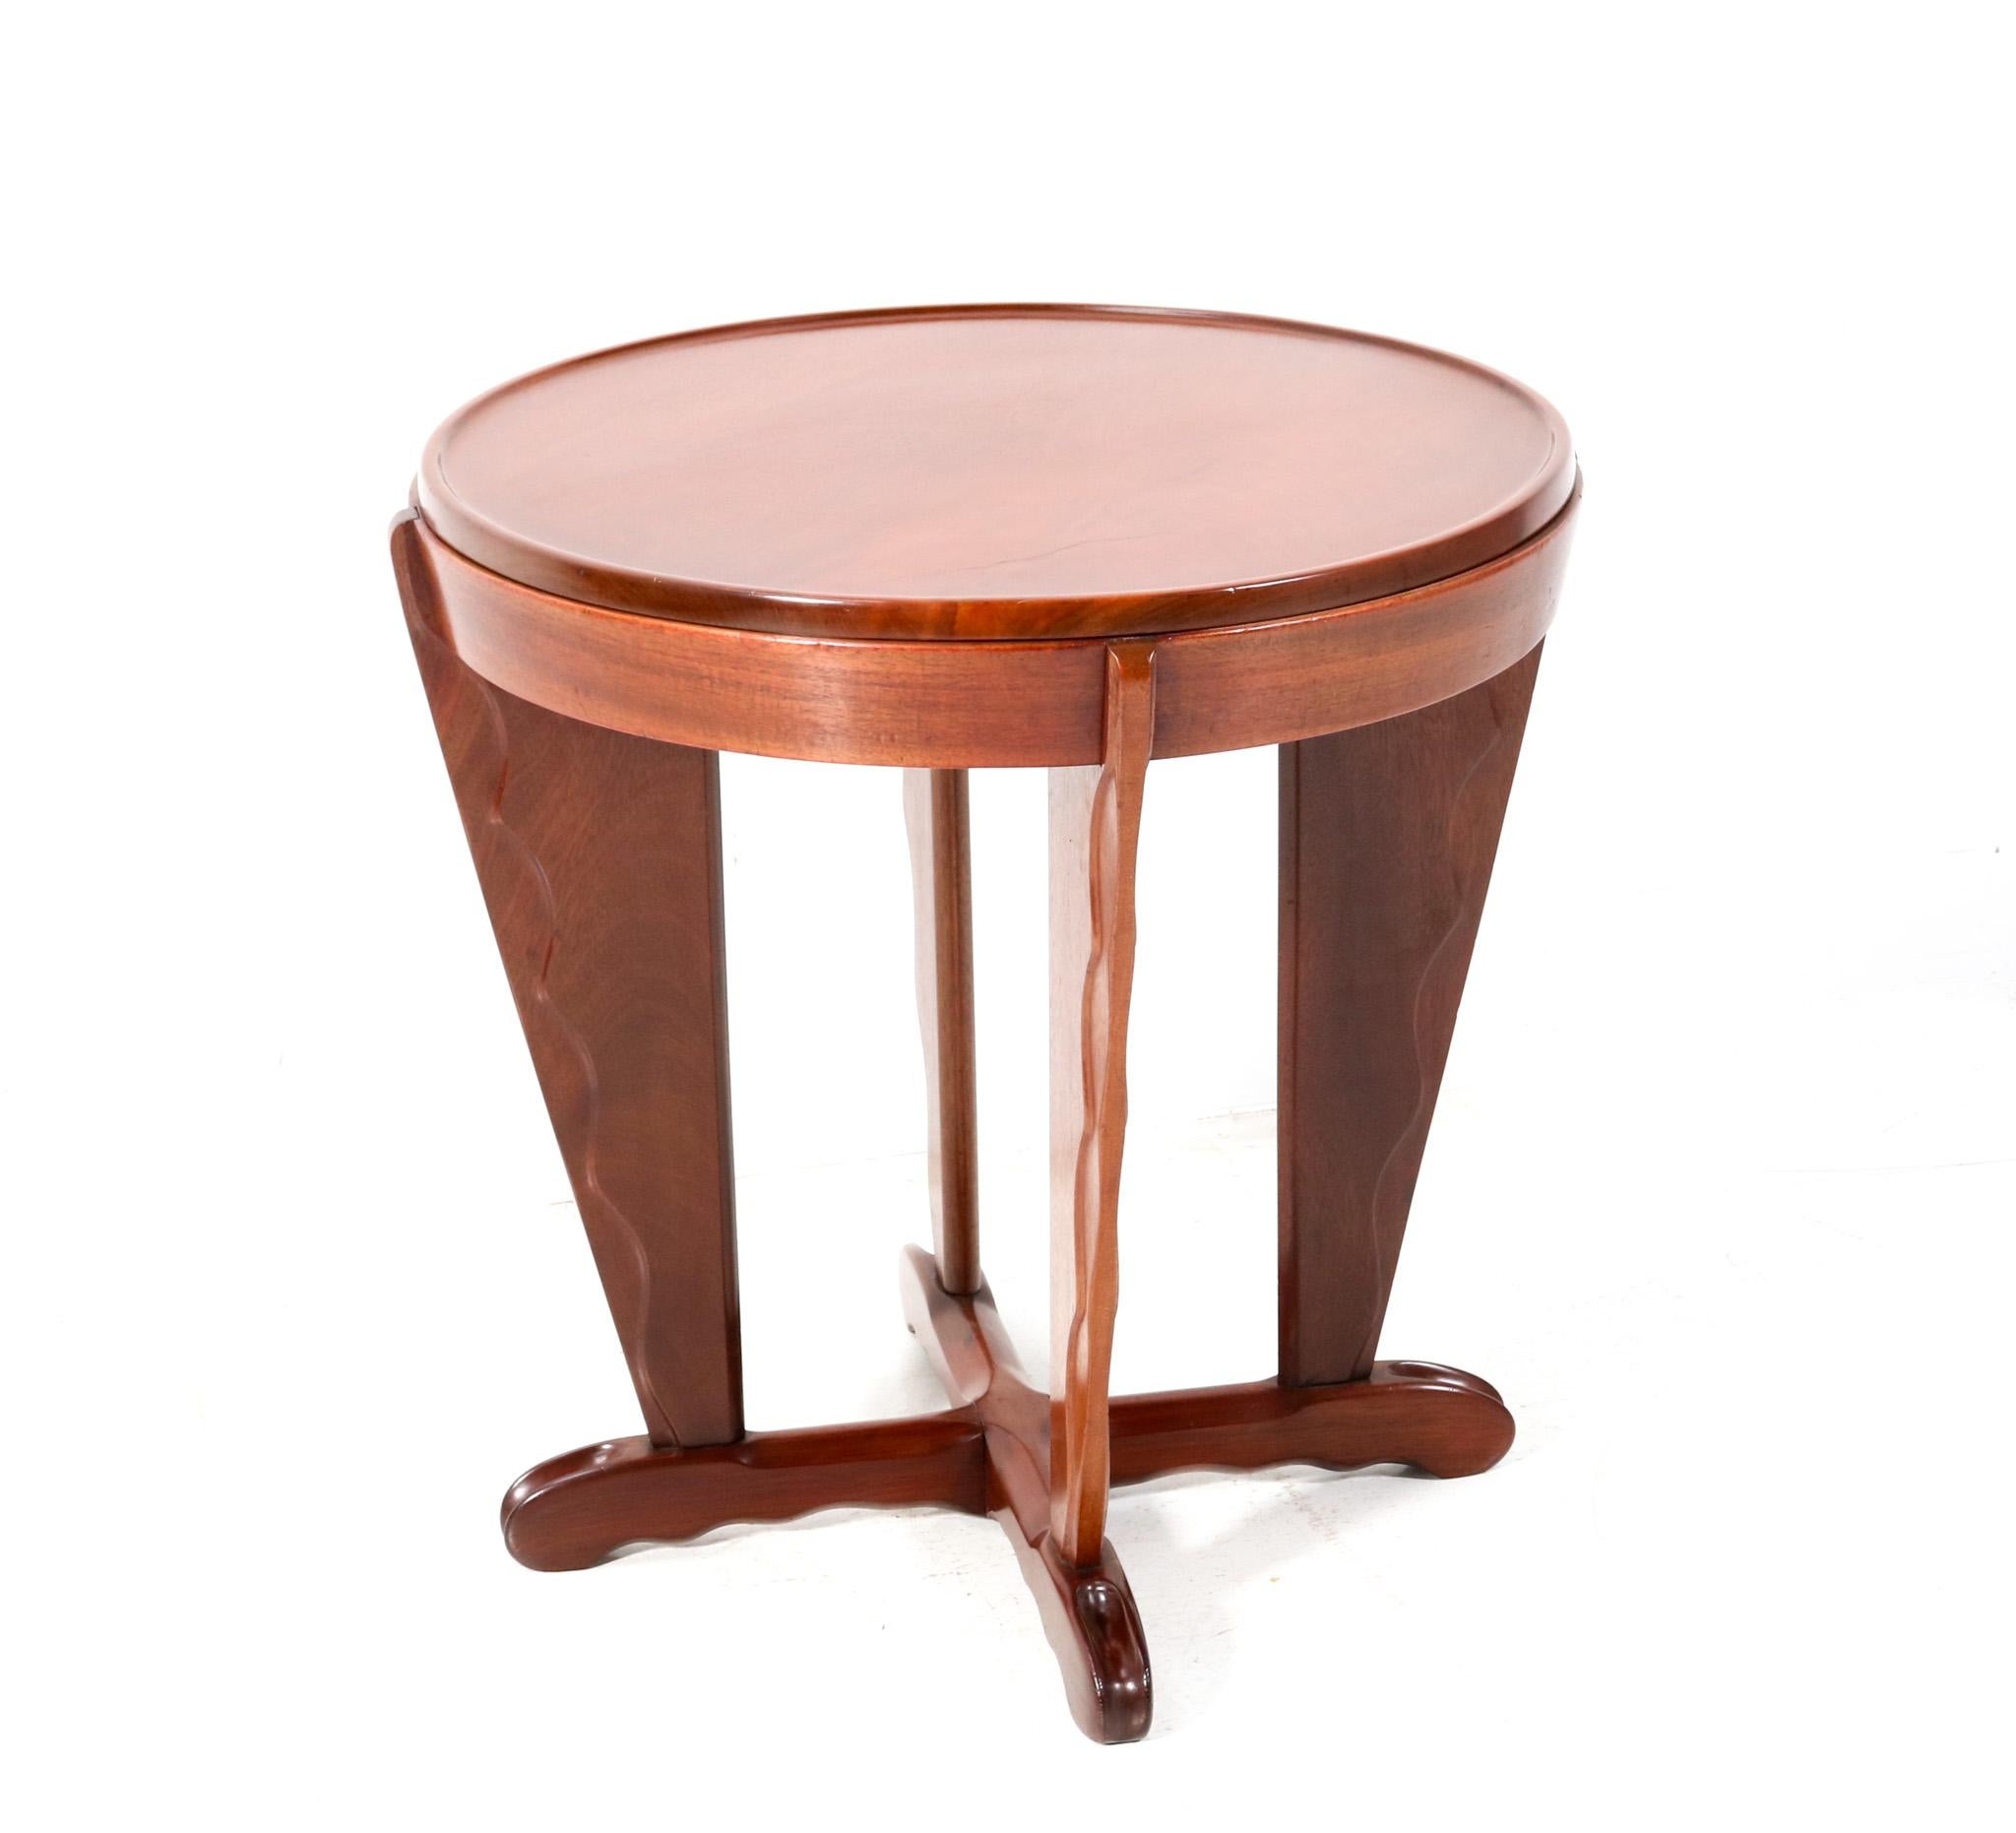 Magnificent and rare Art Deco Amsterdamse School side table.
Design by A.F. van der Weij.
Striking Dutch design from the 1920s.
Solid walnut base with four elegant and stylish feet.
This wonderful Art Deco Amsterdamse School side table by A.F. van